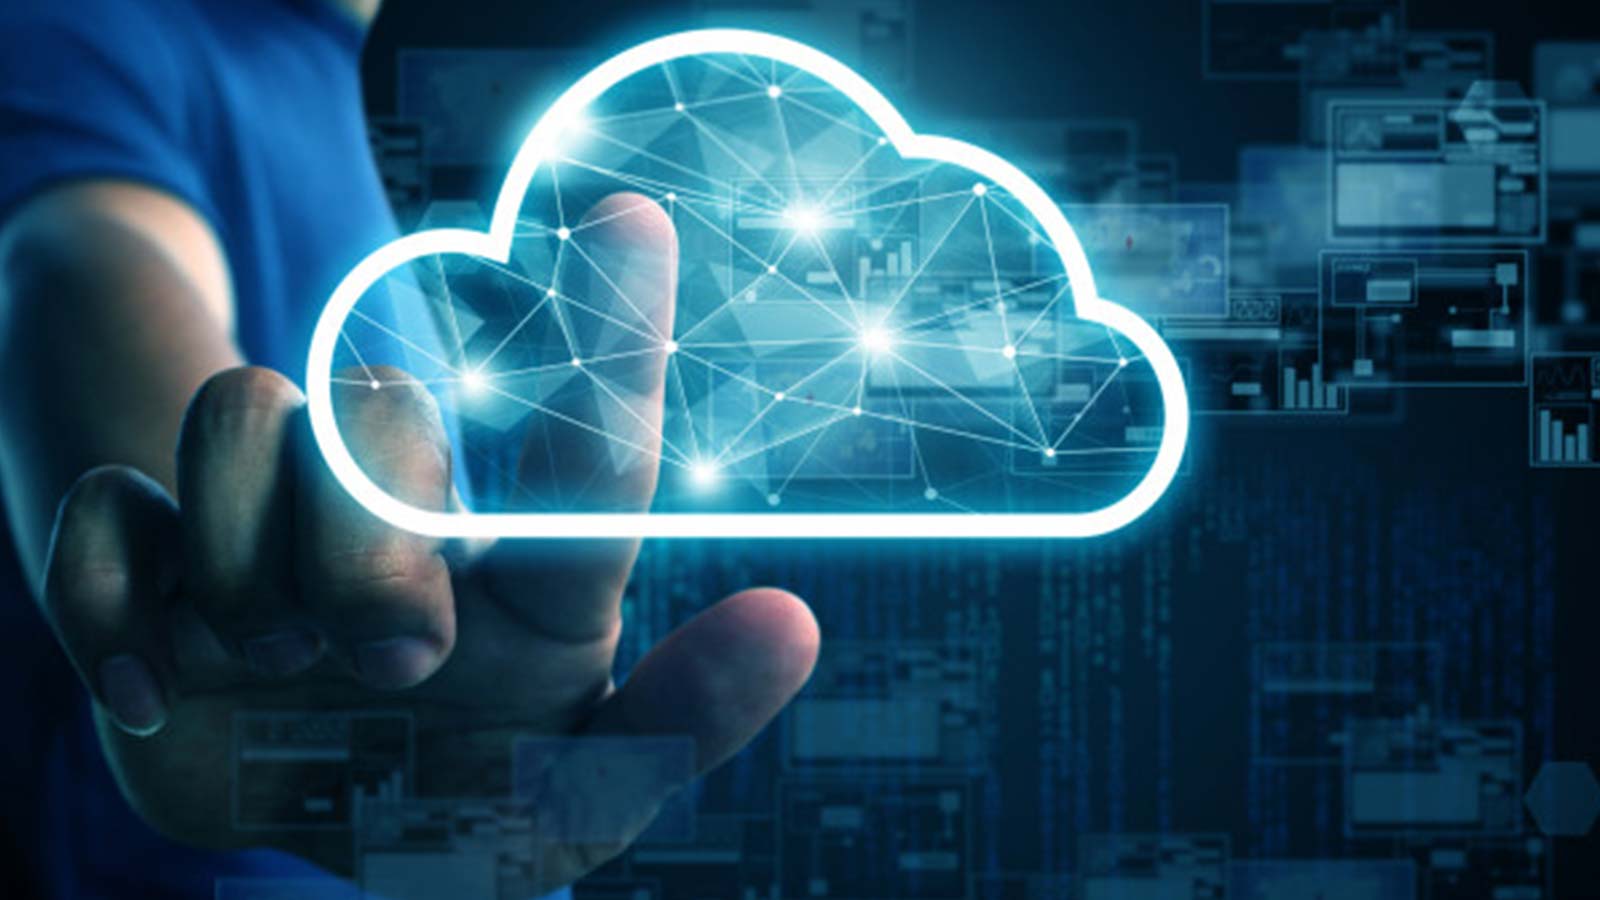 Cloud Computing Can Help SMEs Beat Global Supply Disruption